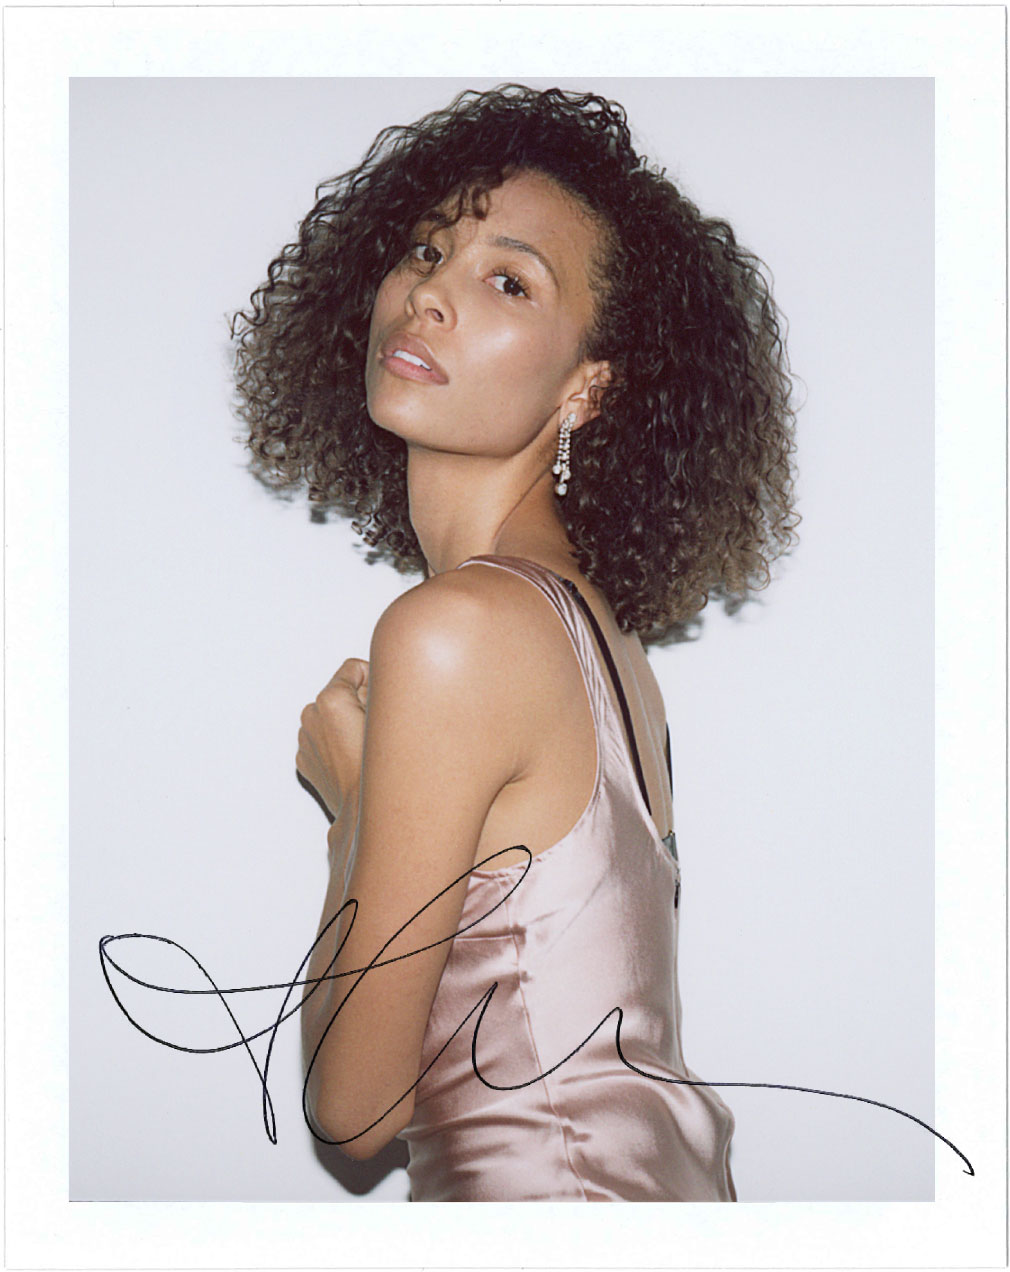 Art Polaroid Portrait Tylynn Nguyen by Jane Smith Creative Agency for Nice People Only